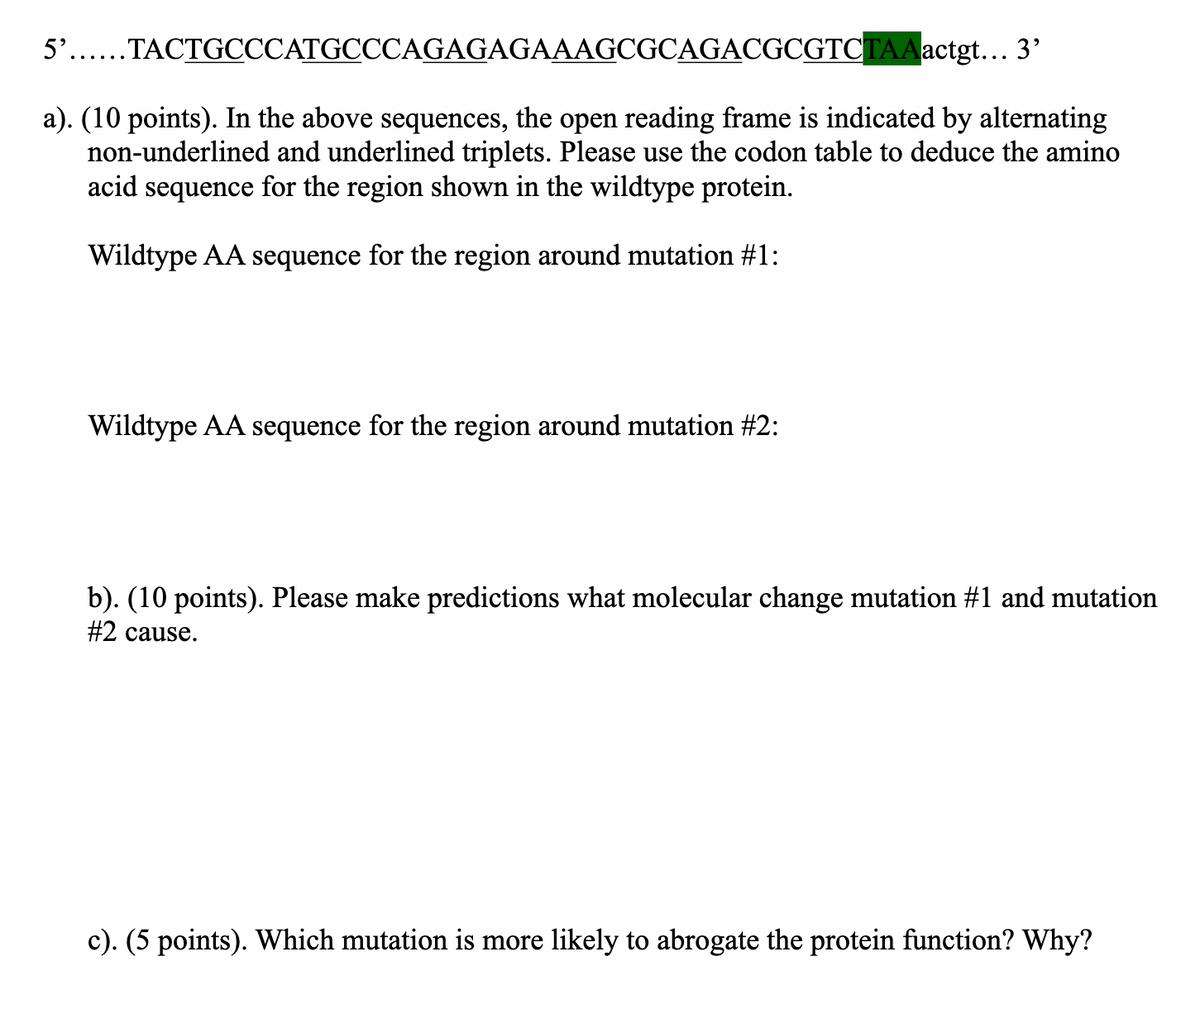 5'......TACTGCCCATGCCCAGAGAGAAAGCGCAGACGCGTCTAAactgt... 3'
a). (10 points). In the above sequences, the open reading frame is indicated by alternating
non-underlined and underlined triplets. Please use the codon table to deduce the amino
acid sequence for the region shown in the wildtype protein.
Wildtype AA sequence for the region around mutation #1:
Wildtype AA sequence for the region around mutation #2:
b). (10 points). Please make predictions what molecular change mutation #1 and mutation
#2 cause.
c). (5 points). Which mutation is more likely to abrogate the protein function? Why?